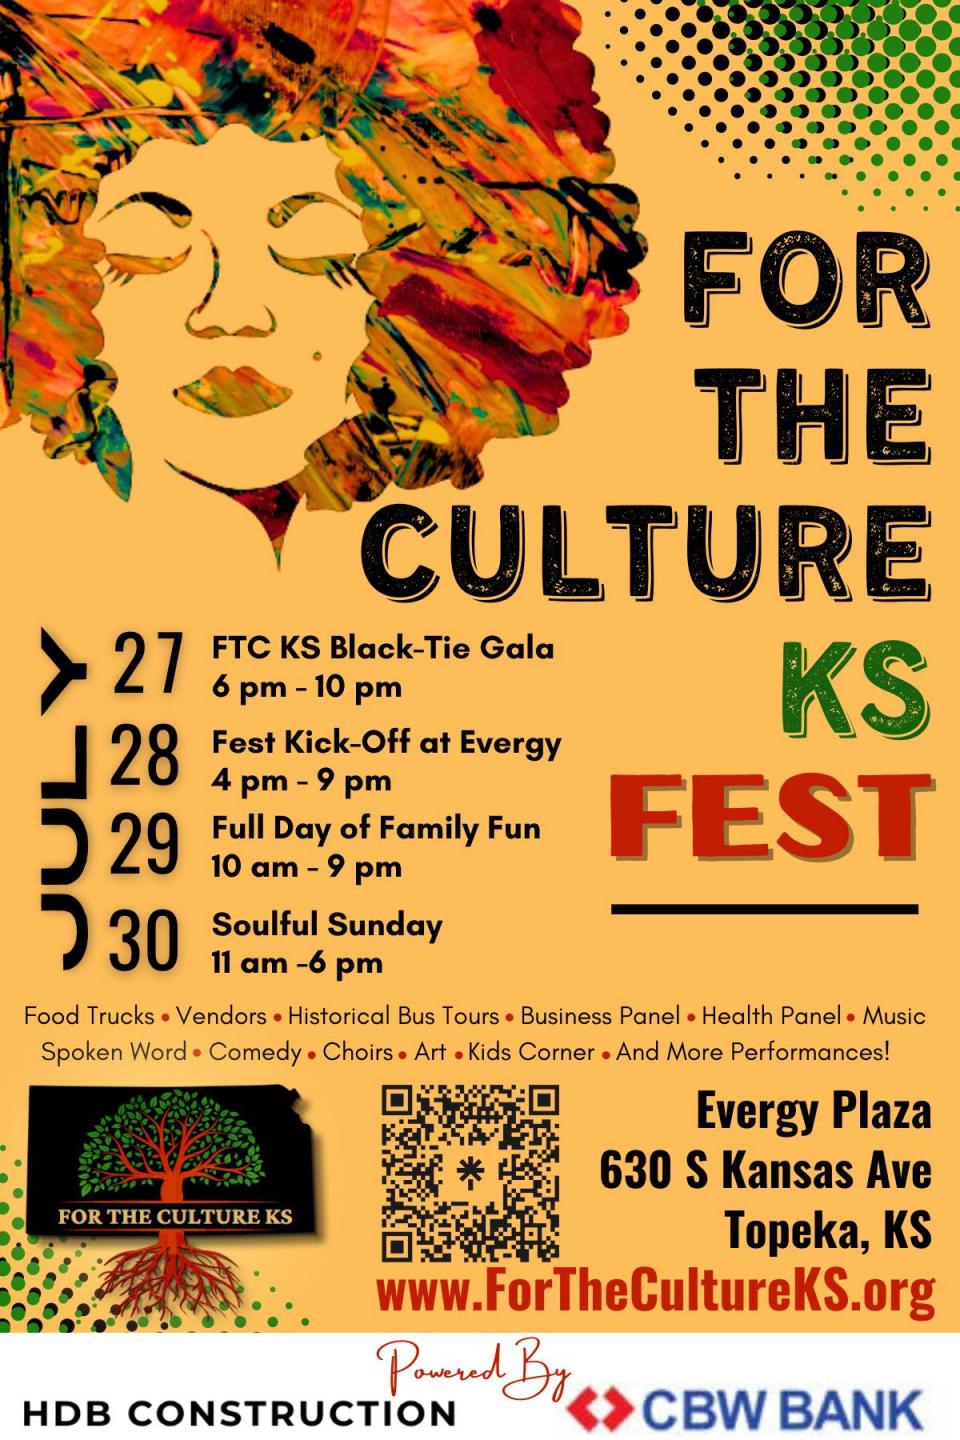 For the Culture KS is a inaugural event that looks to embrace Black Culture in not only Topeka, but Kansas as a whole.